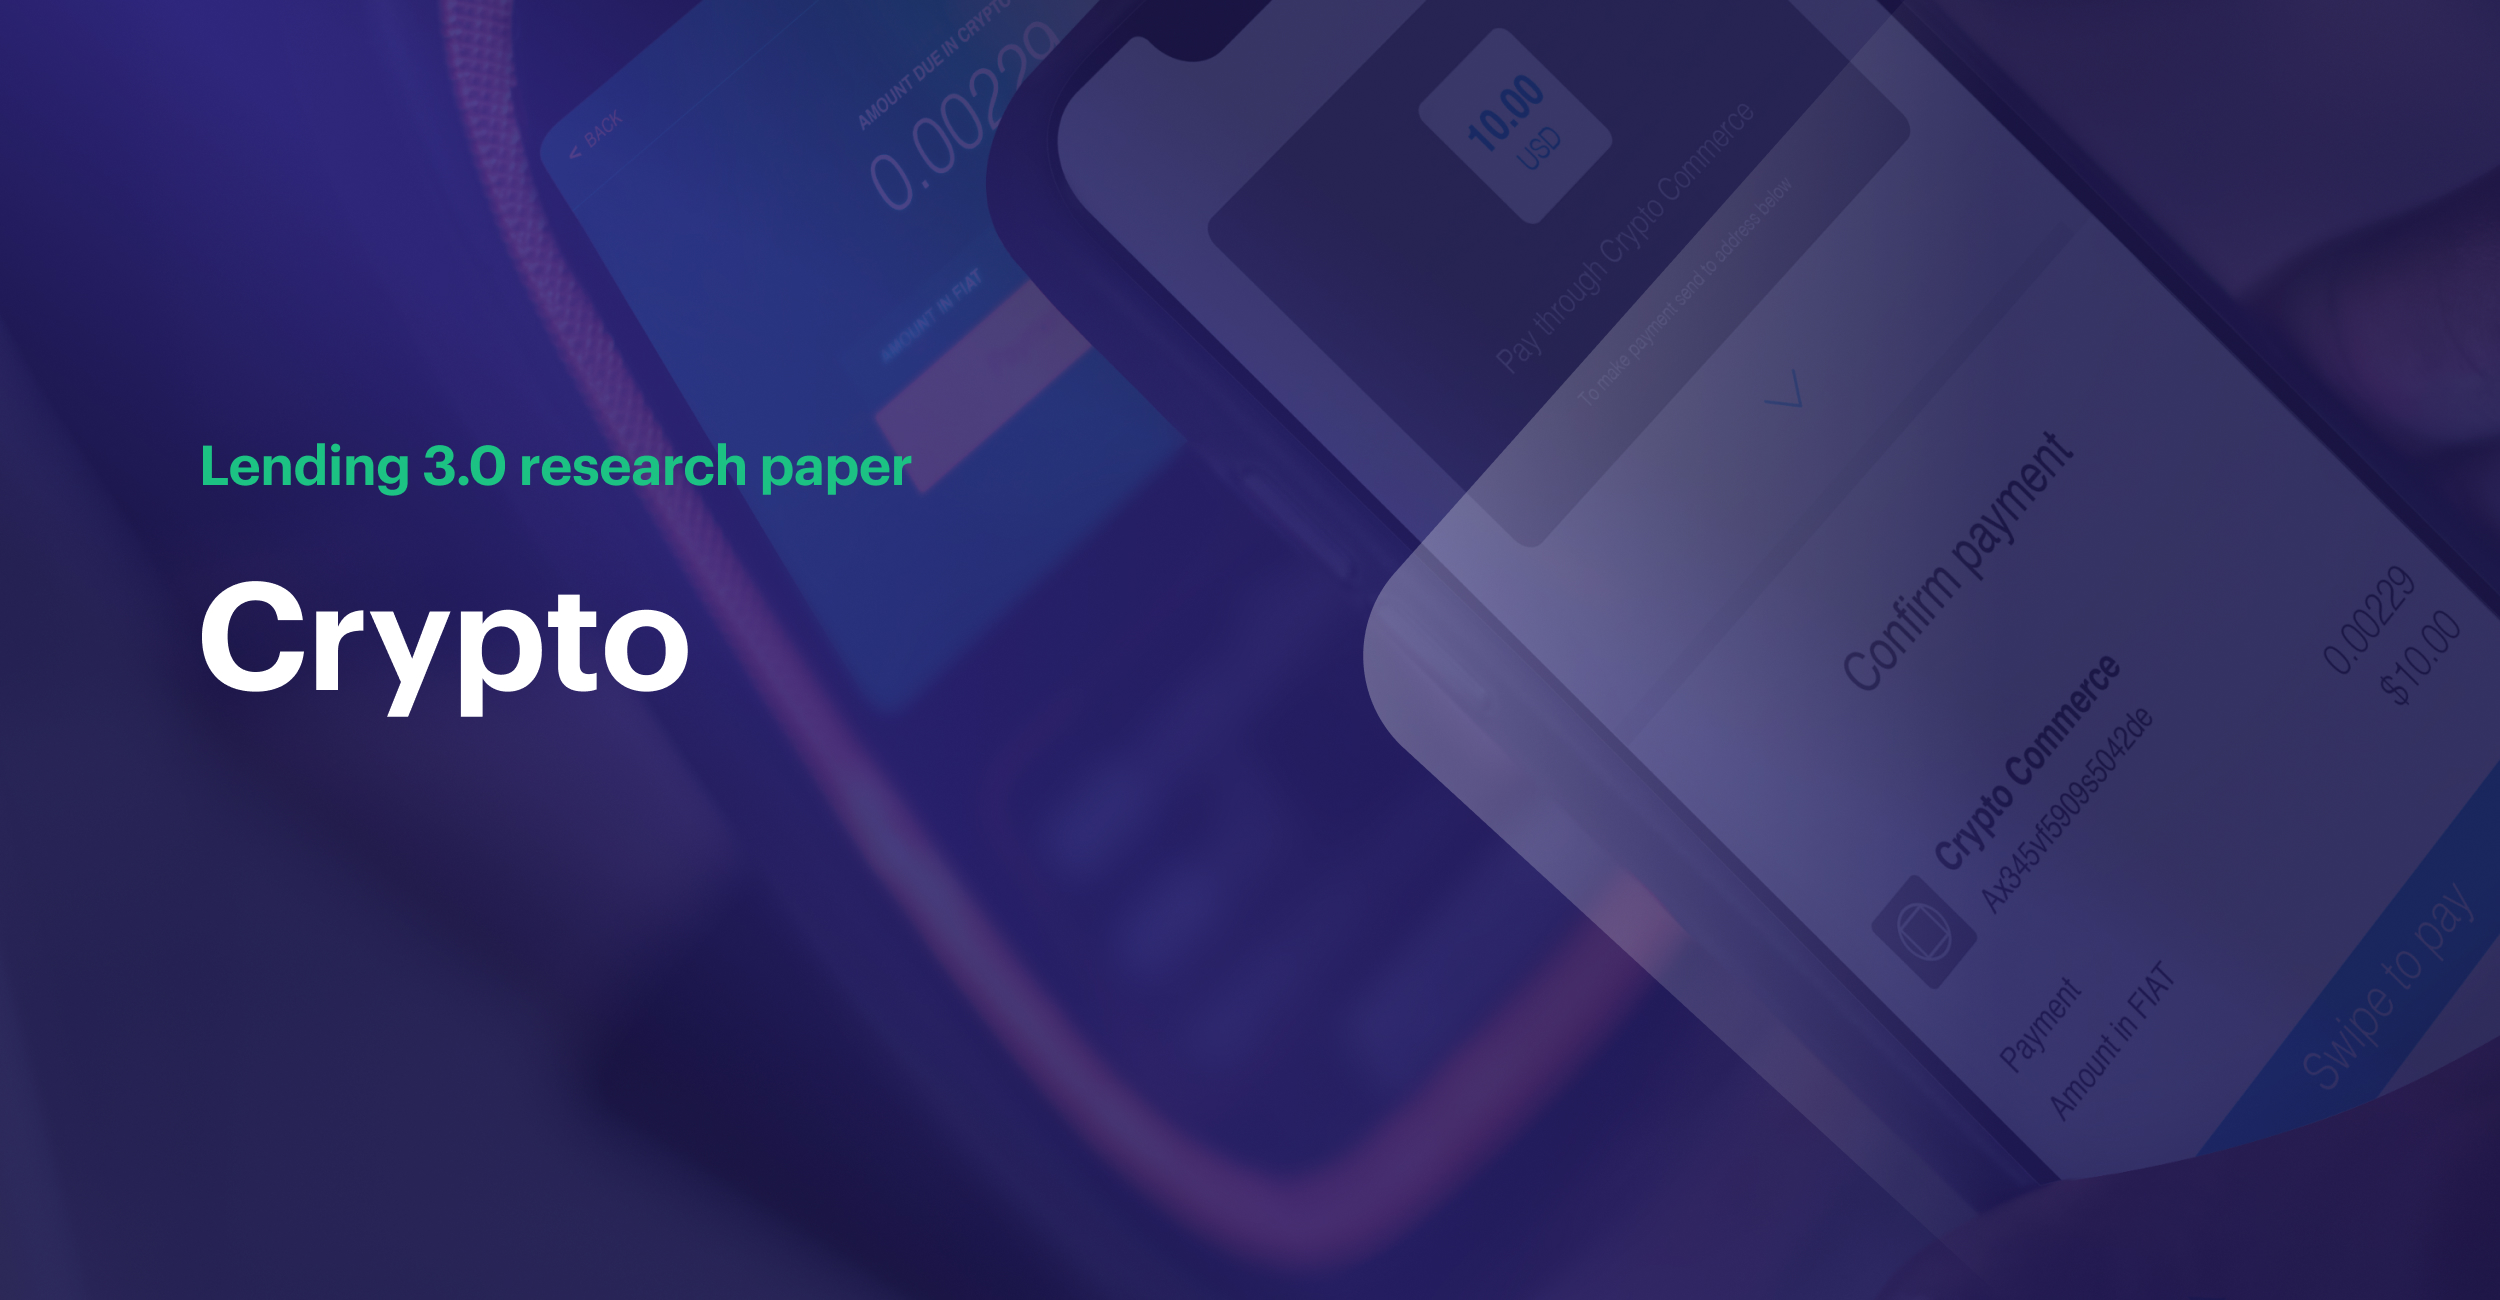 Lending-3.0-research-paper-Crypto